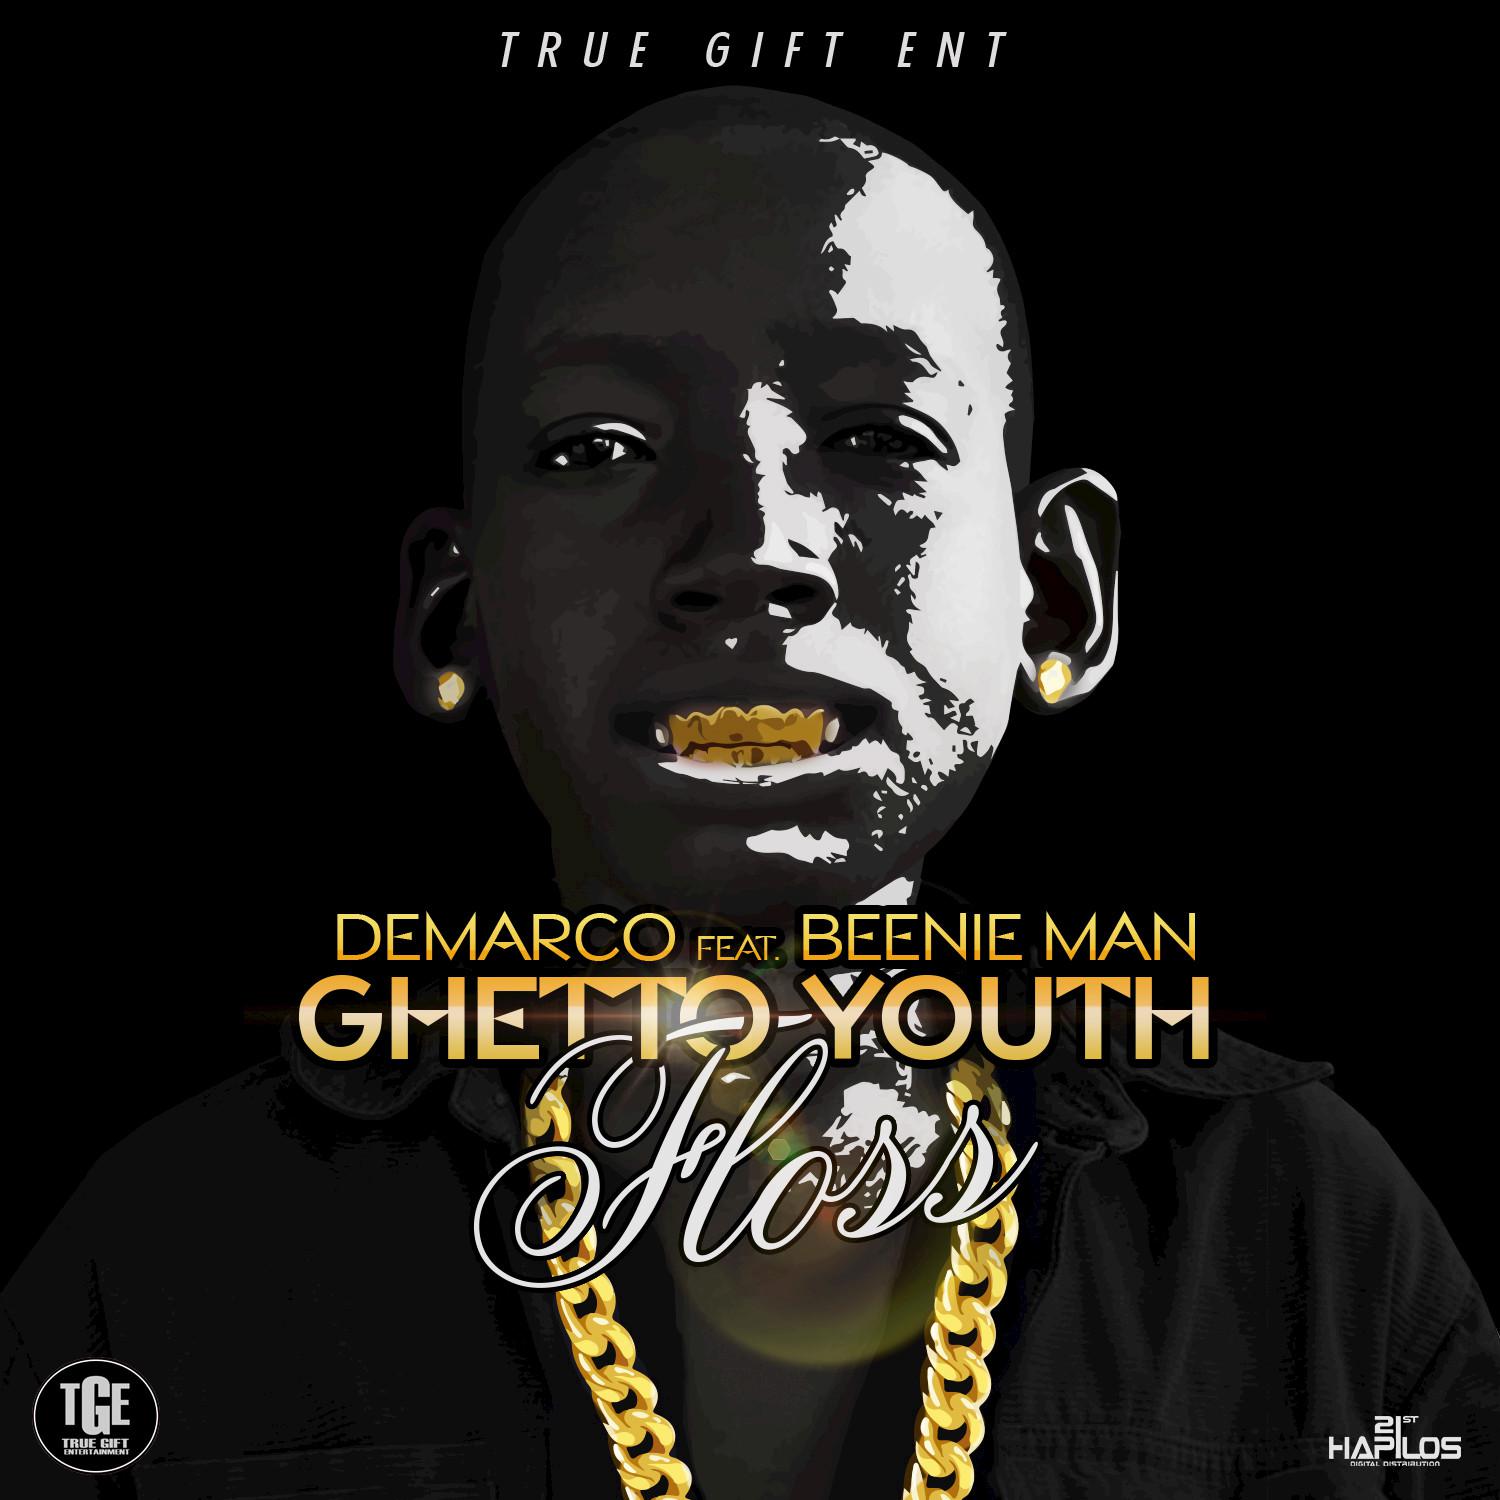 Ghetto Youth Floss (feat. Beenie Man) - Single